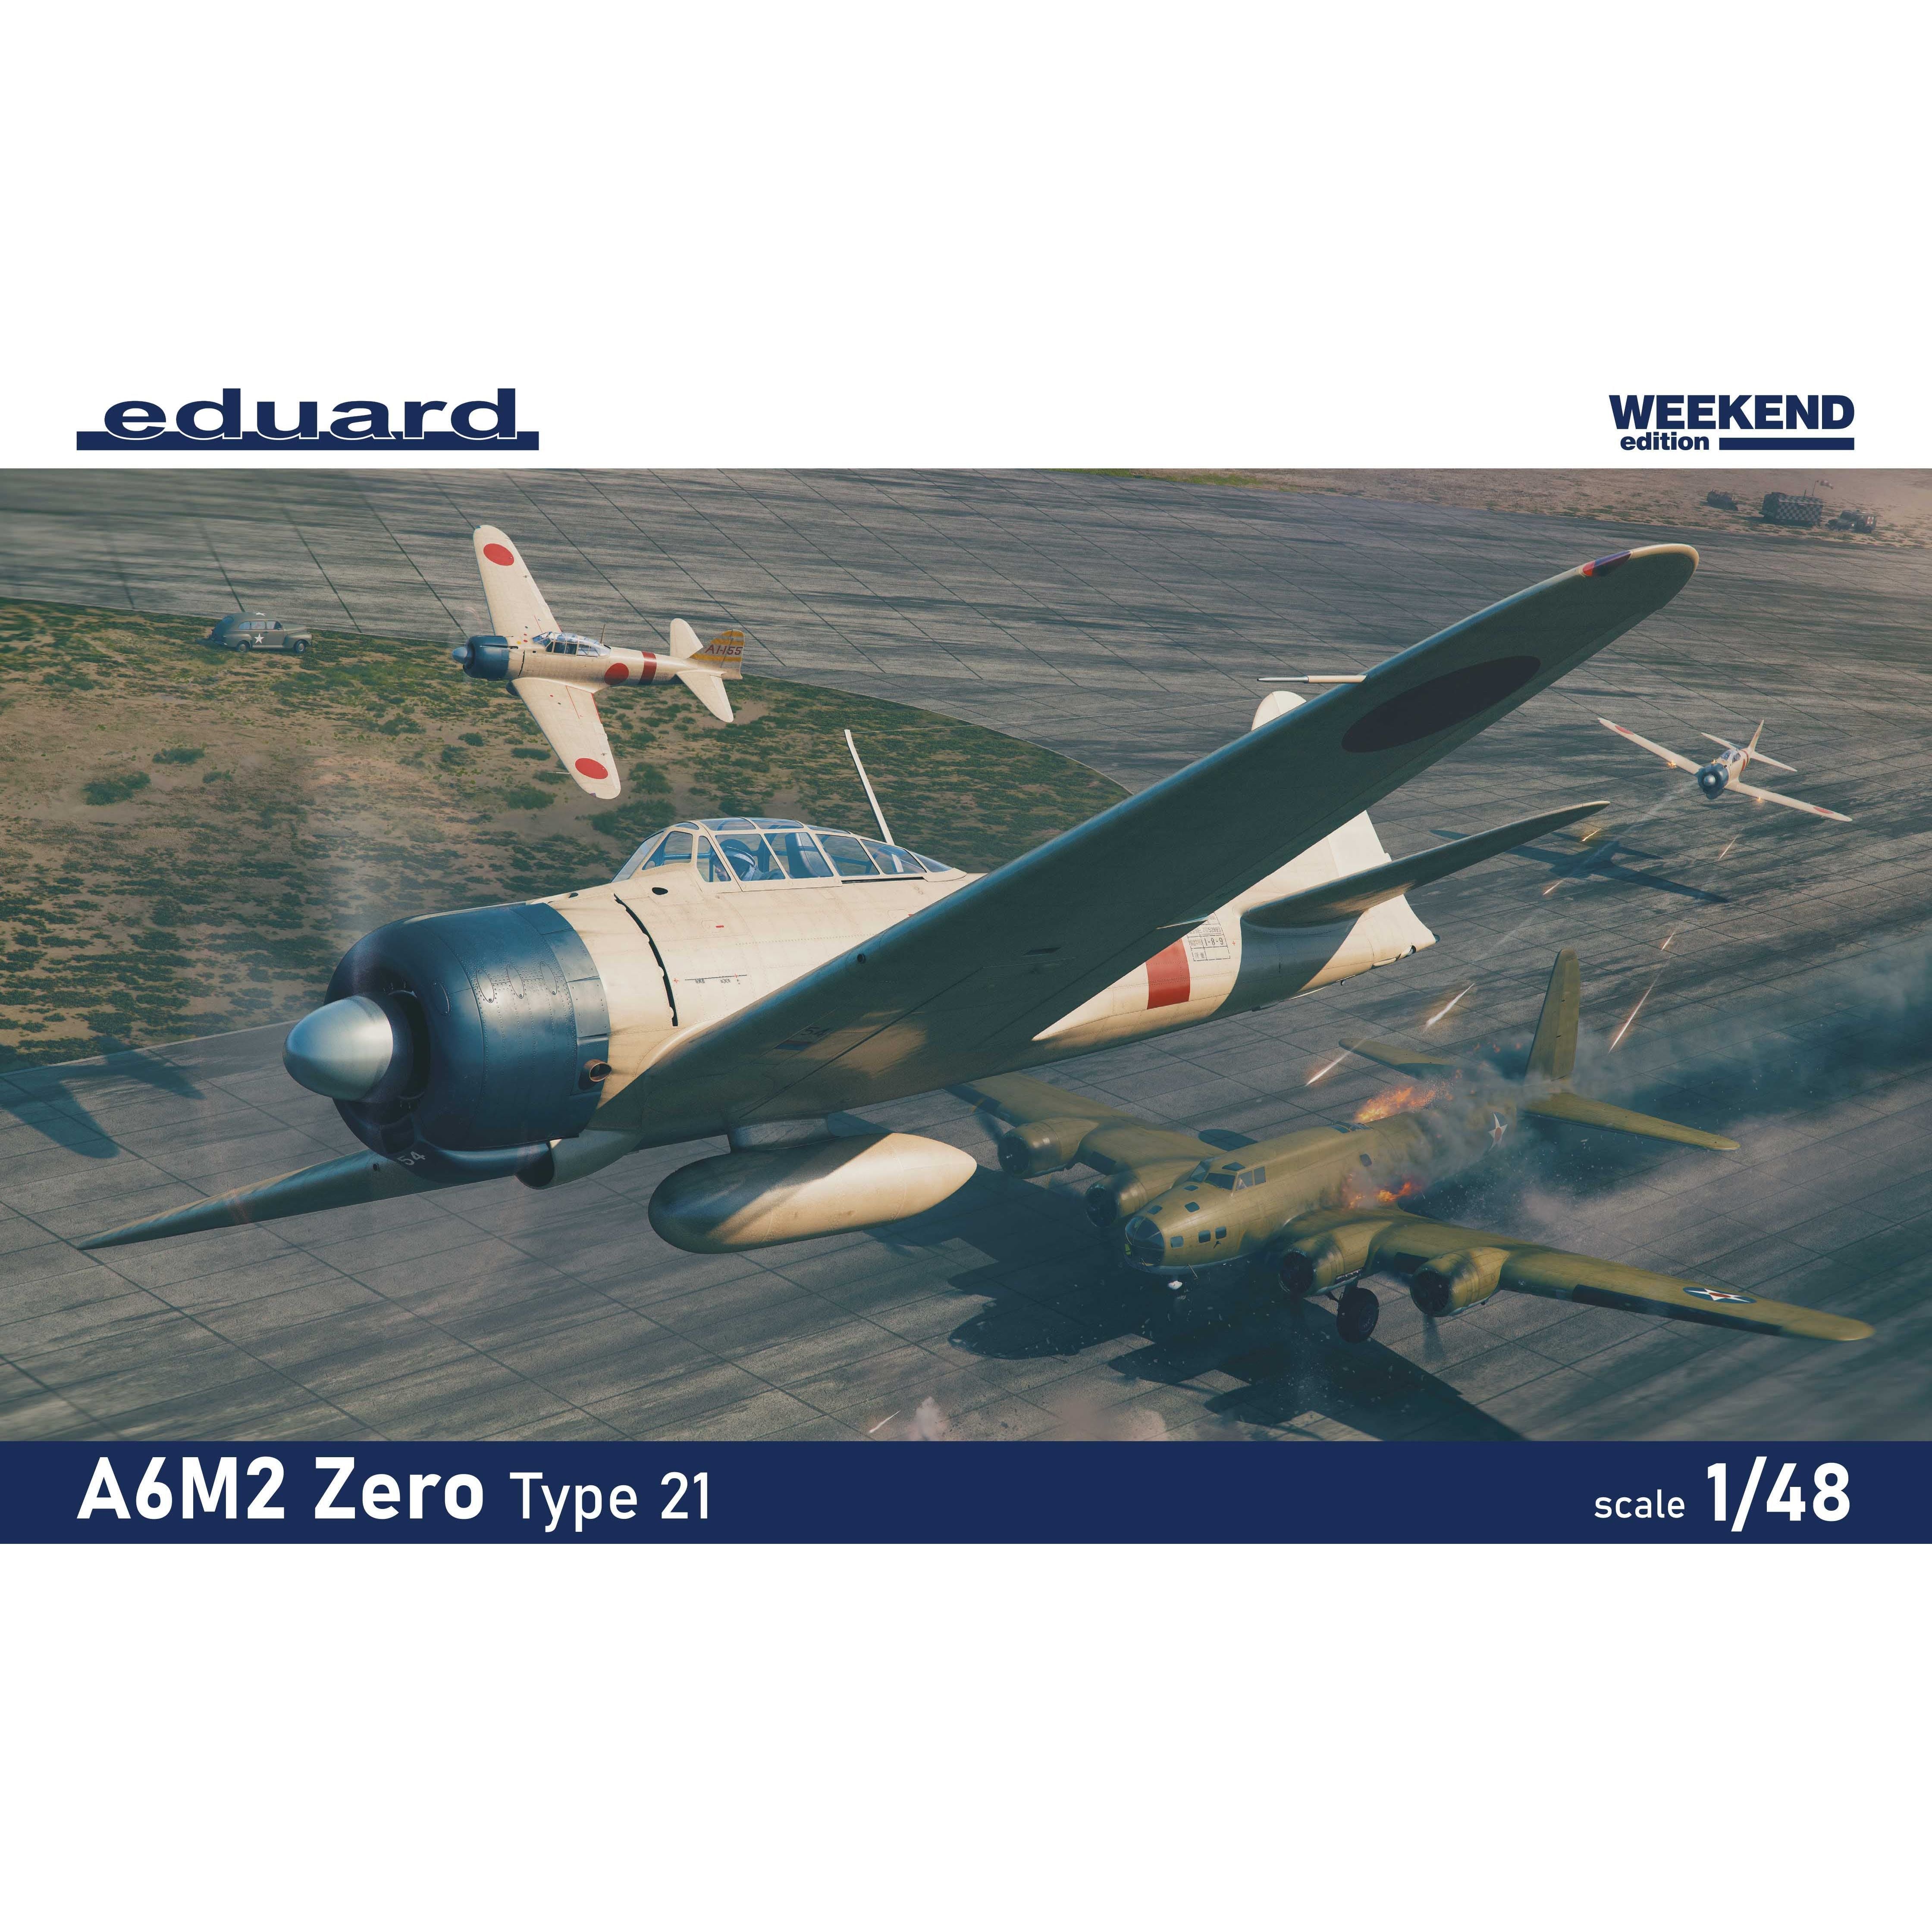 A6M2 Zero Type 21 [Weekend Edition] 1/48 #84189 by Eduard